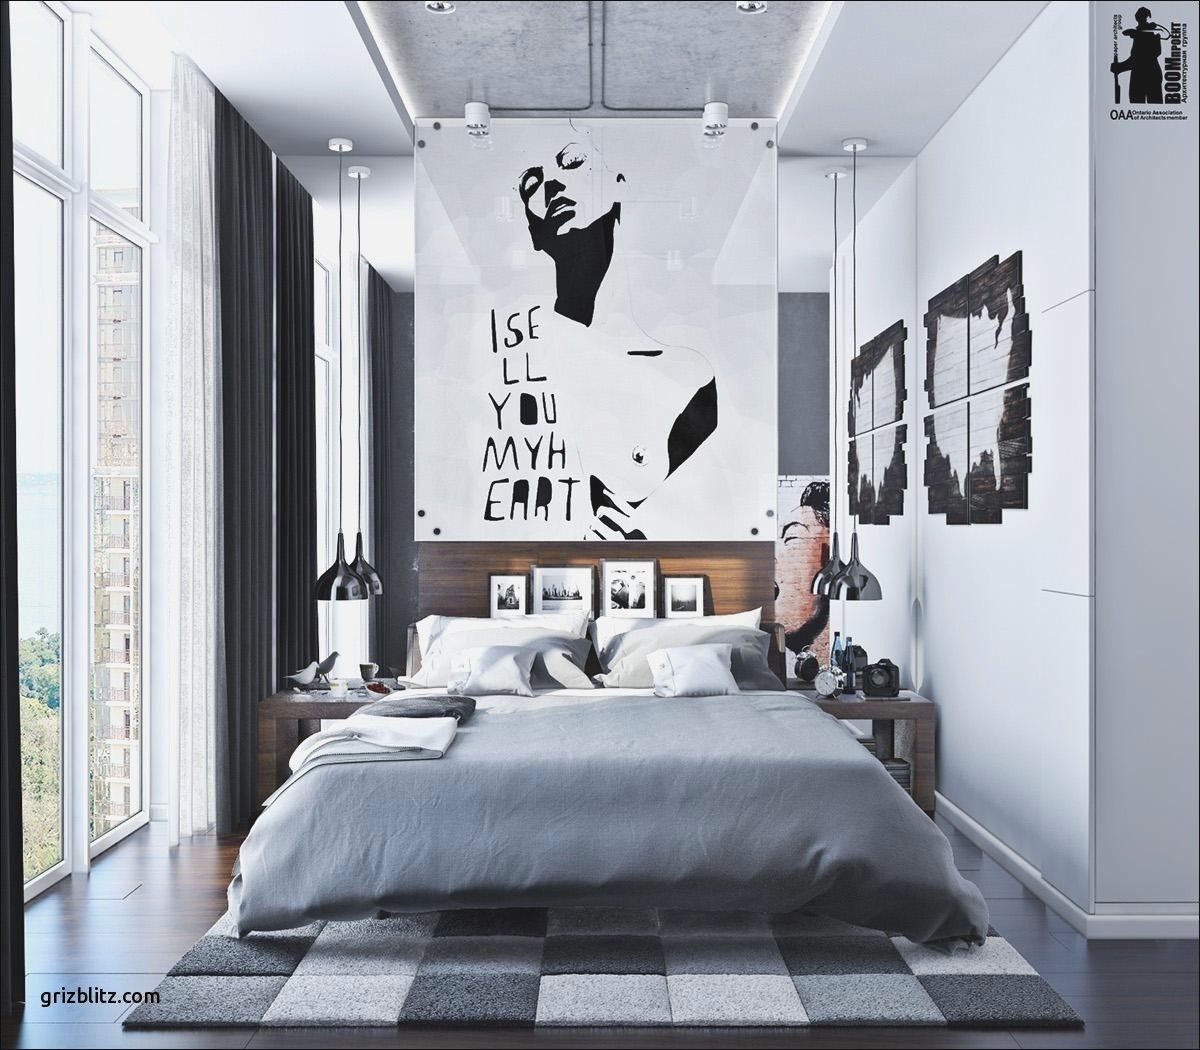 Amazing Men Bedroom Wall Art Decor Amazing For Guy Wallpaper Idea With Regard To Wall Art For Men (View 13 of 20)